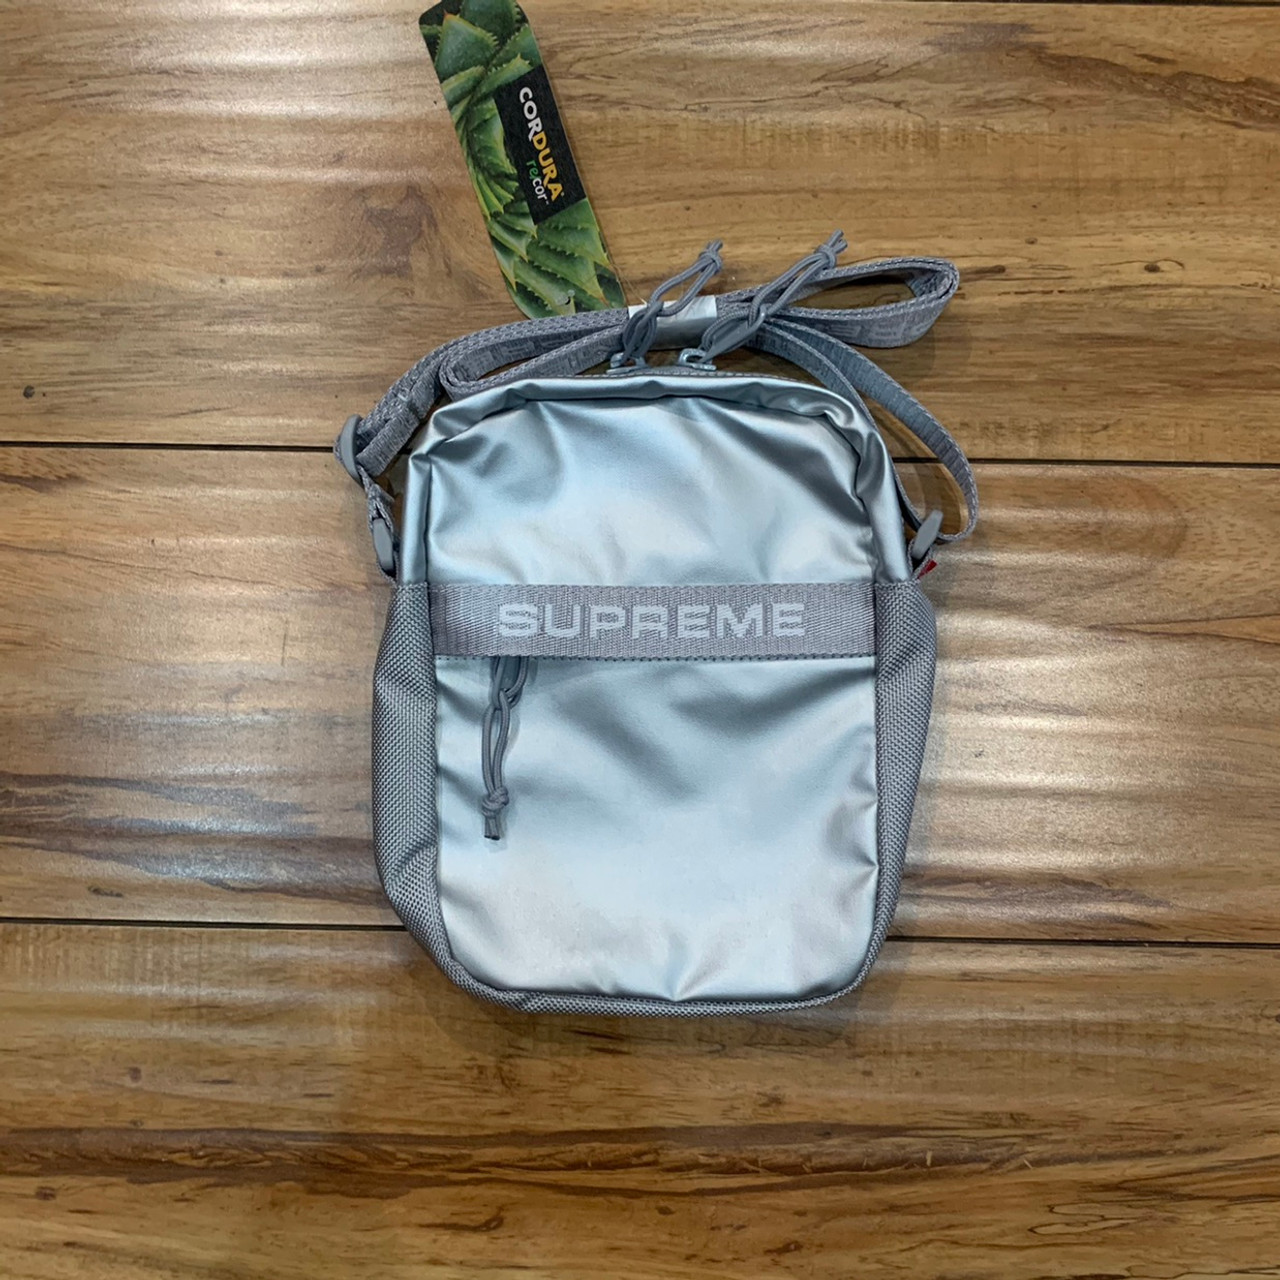 Supreme Shoulder Bag It just any other bag without the Supreme logo on it.  Choose one that screams the b…